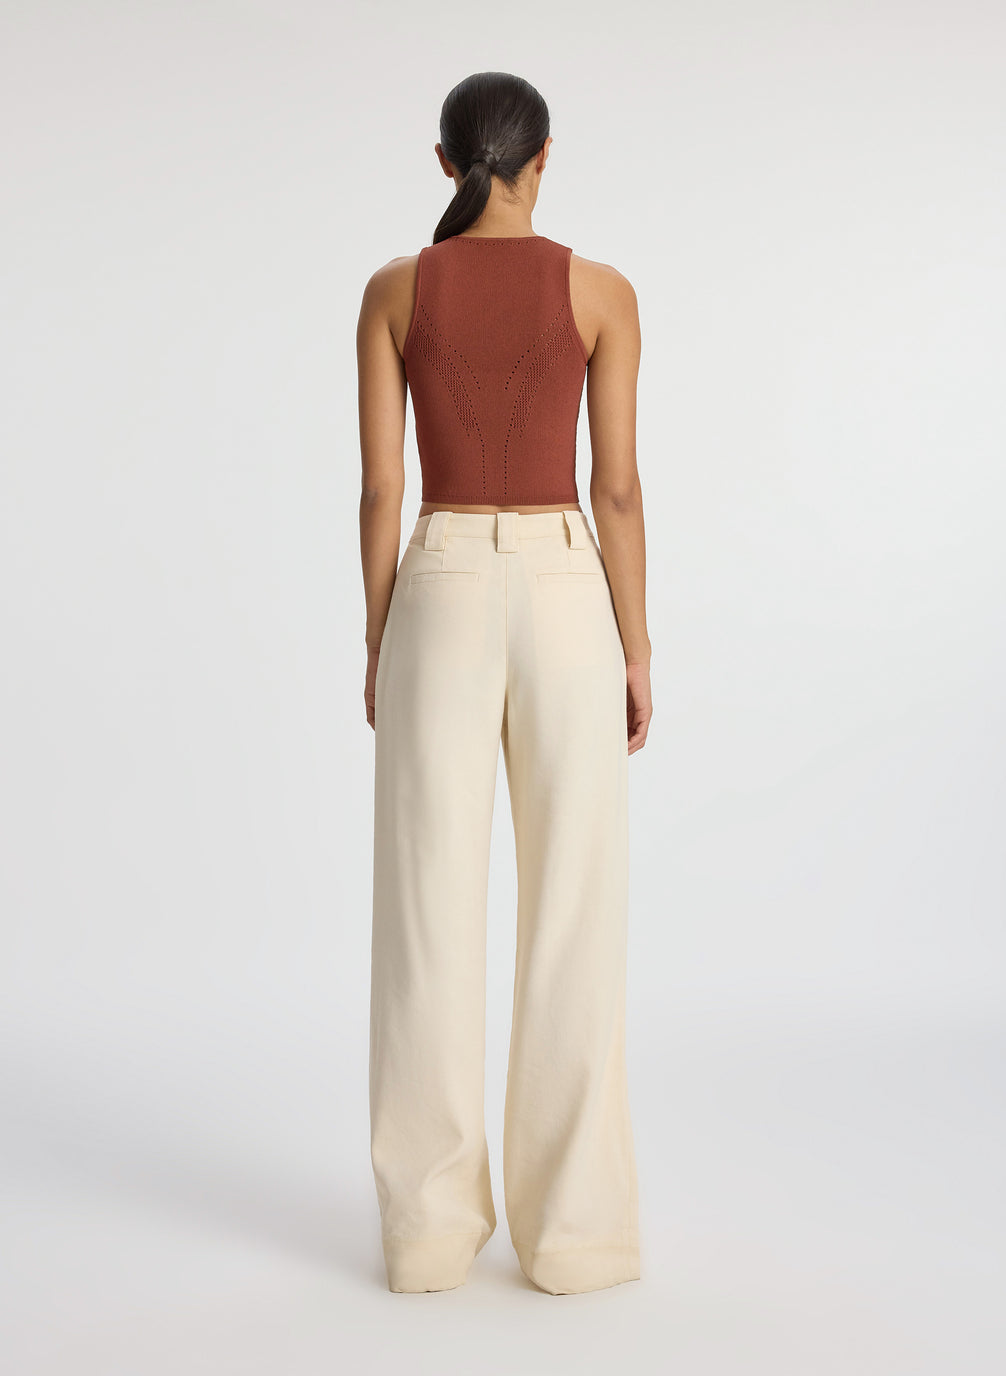 back view of woman wearing brown tank top and beige pants